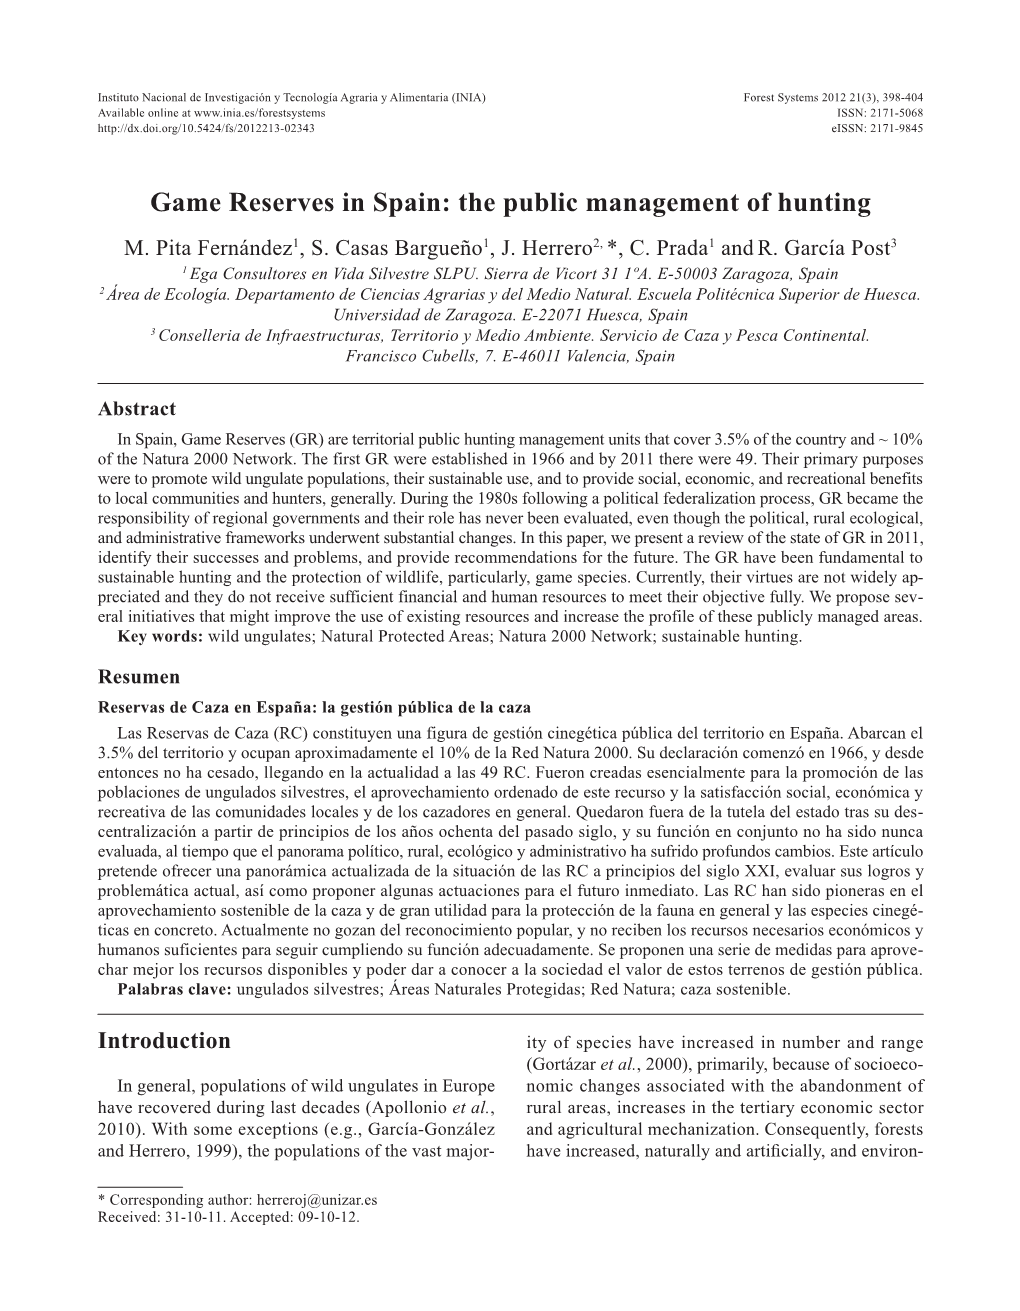 Game Reserves in Spain: the Public Management of Hunting M